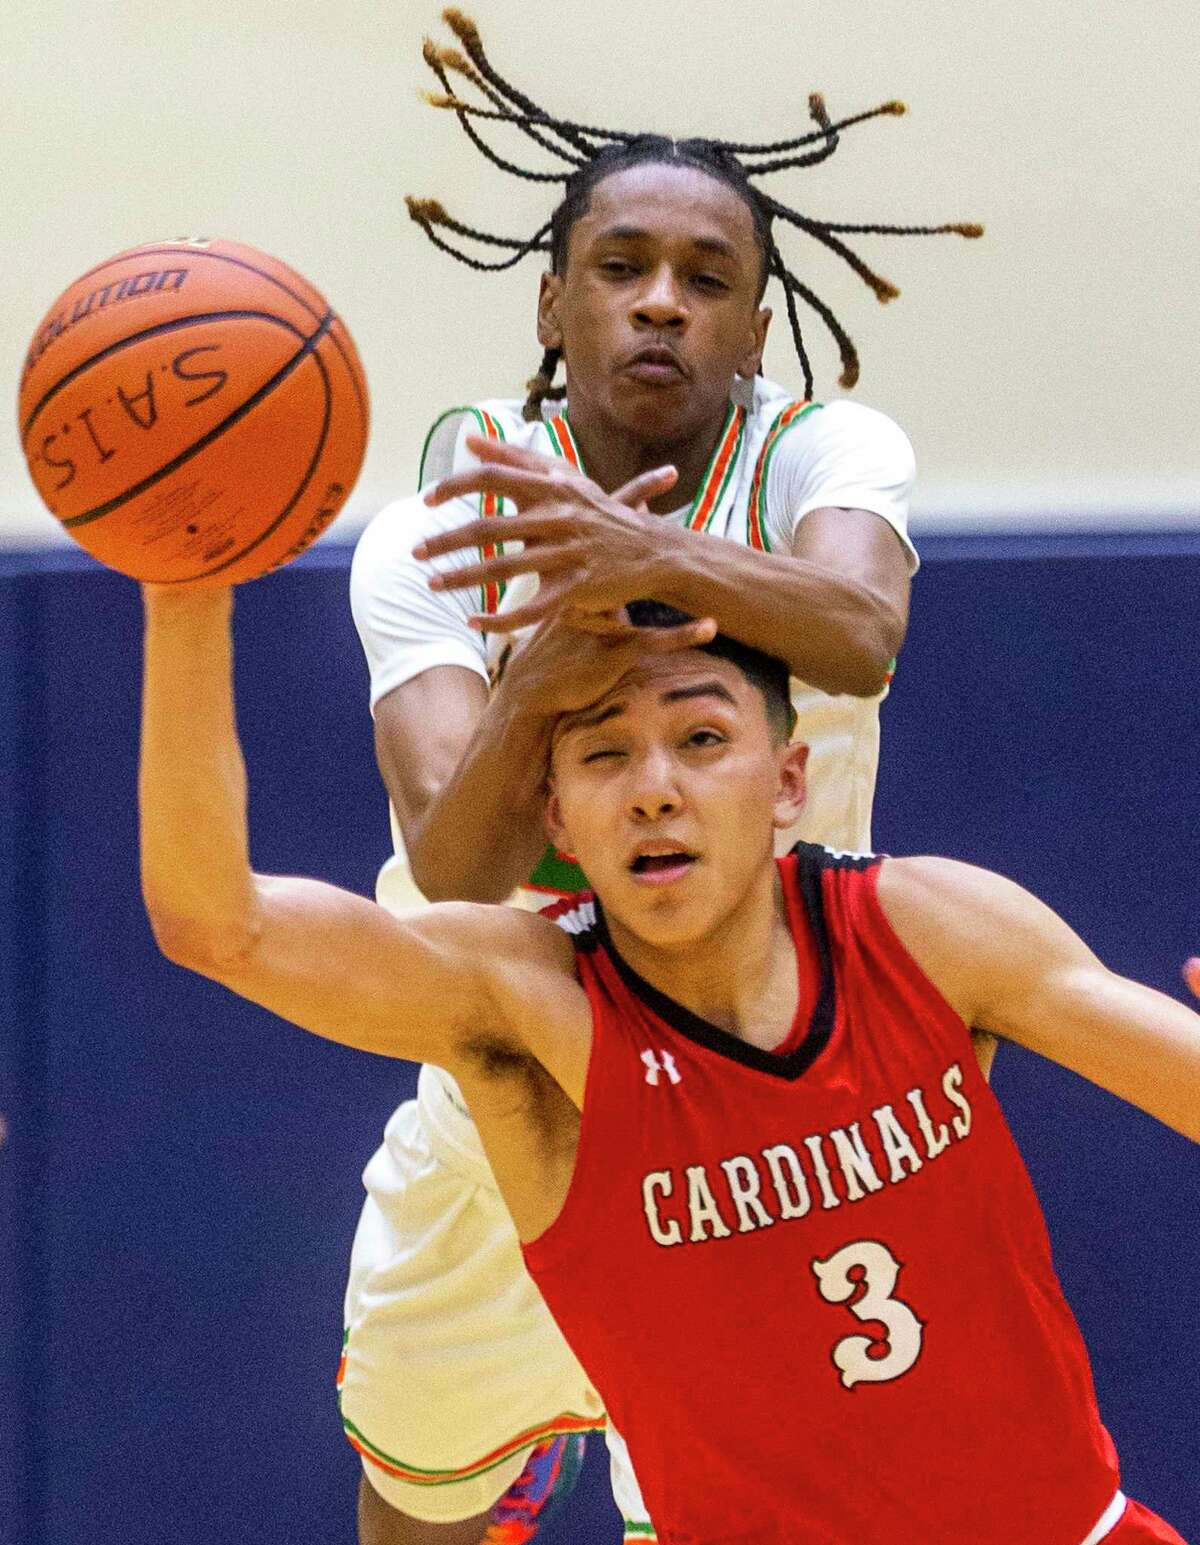 Southside’s Gabriel Hinojosa (3) and Sam Houston’s Caevion Sweeney battle for a loose ball on Monday, Feb. 21, 2022, during a Class 5A first-round playoff game at the Alamo Convocation Center. The Cardinals won and advance to the next round.